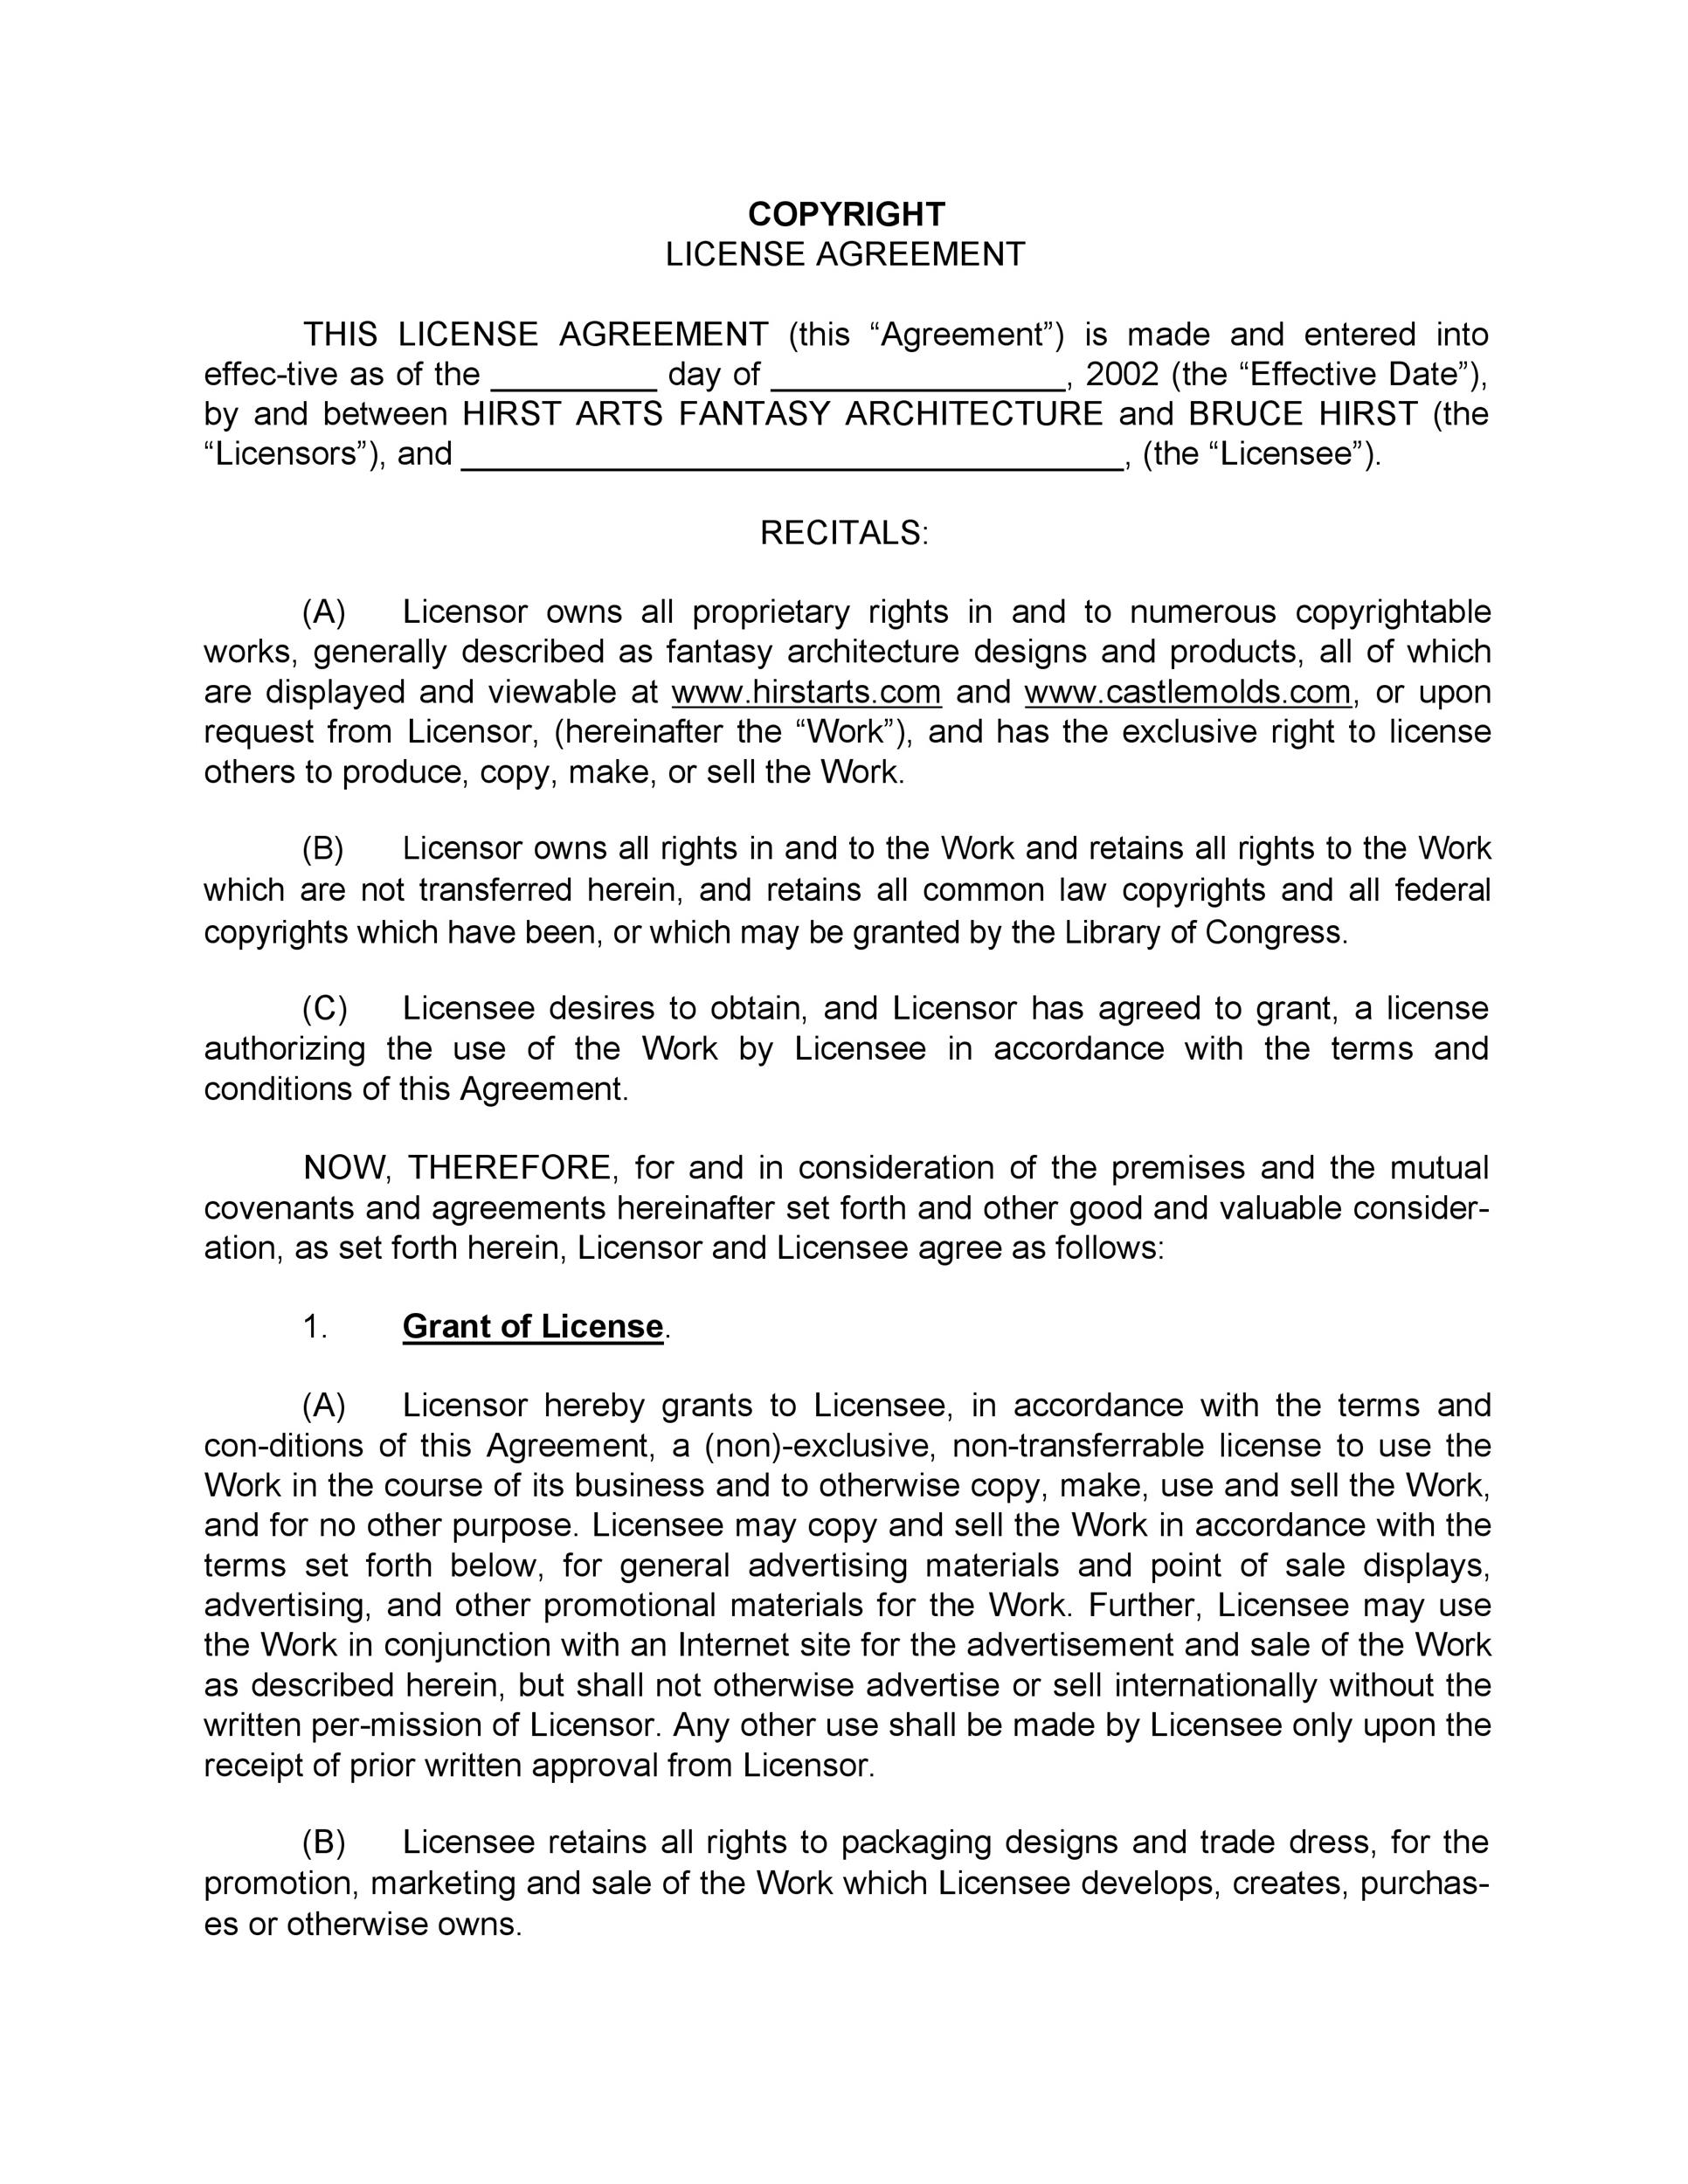 Free license agreement template 08